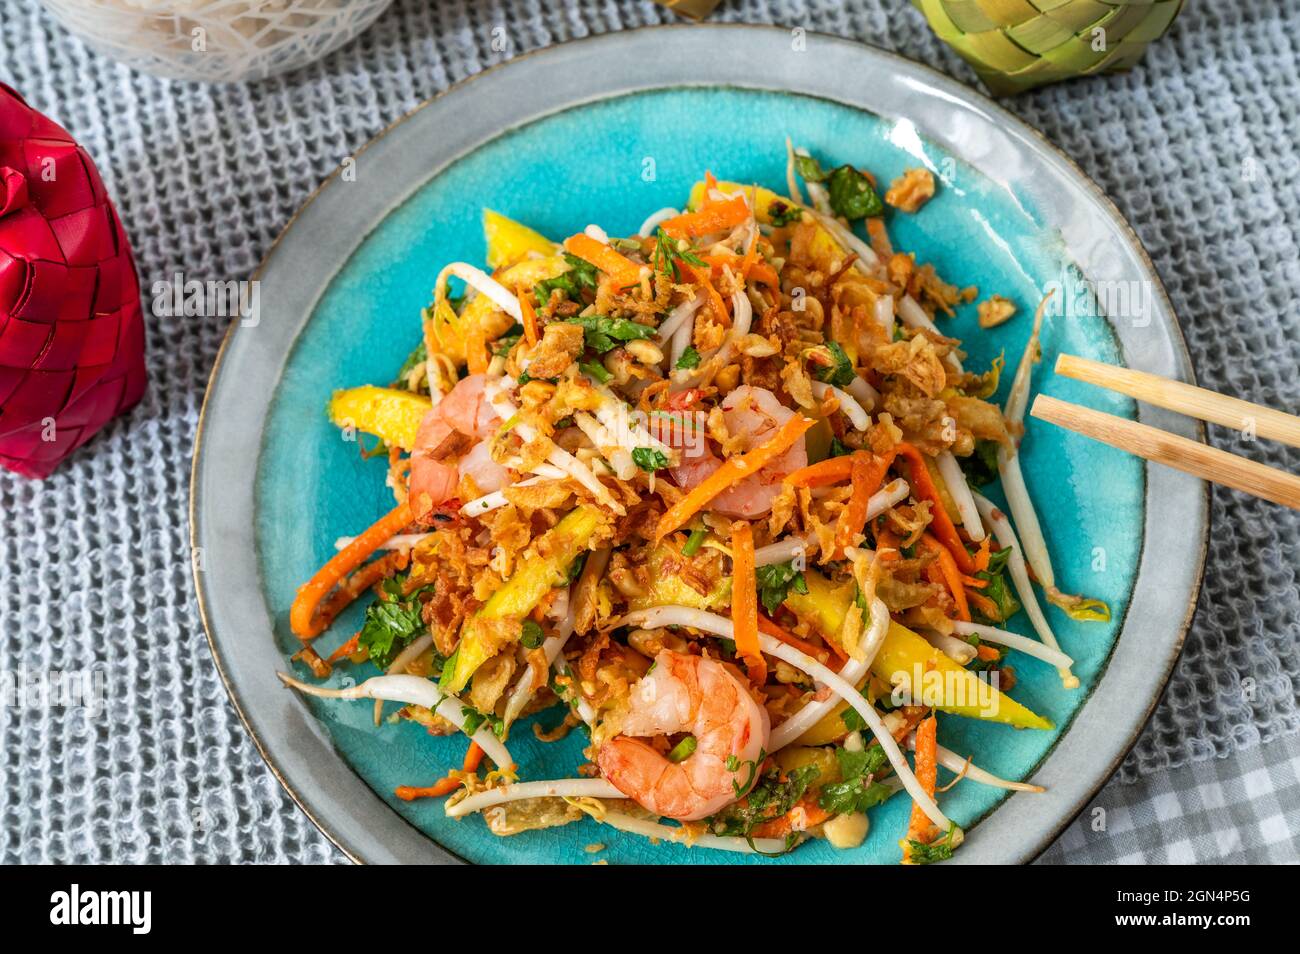 Vietnamese sweet and sour mango salad with shrimp, fried onion and vegetable sprouts on blue plate on table, chopstick. Stock Photo